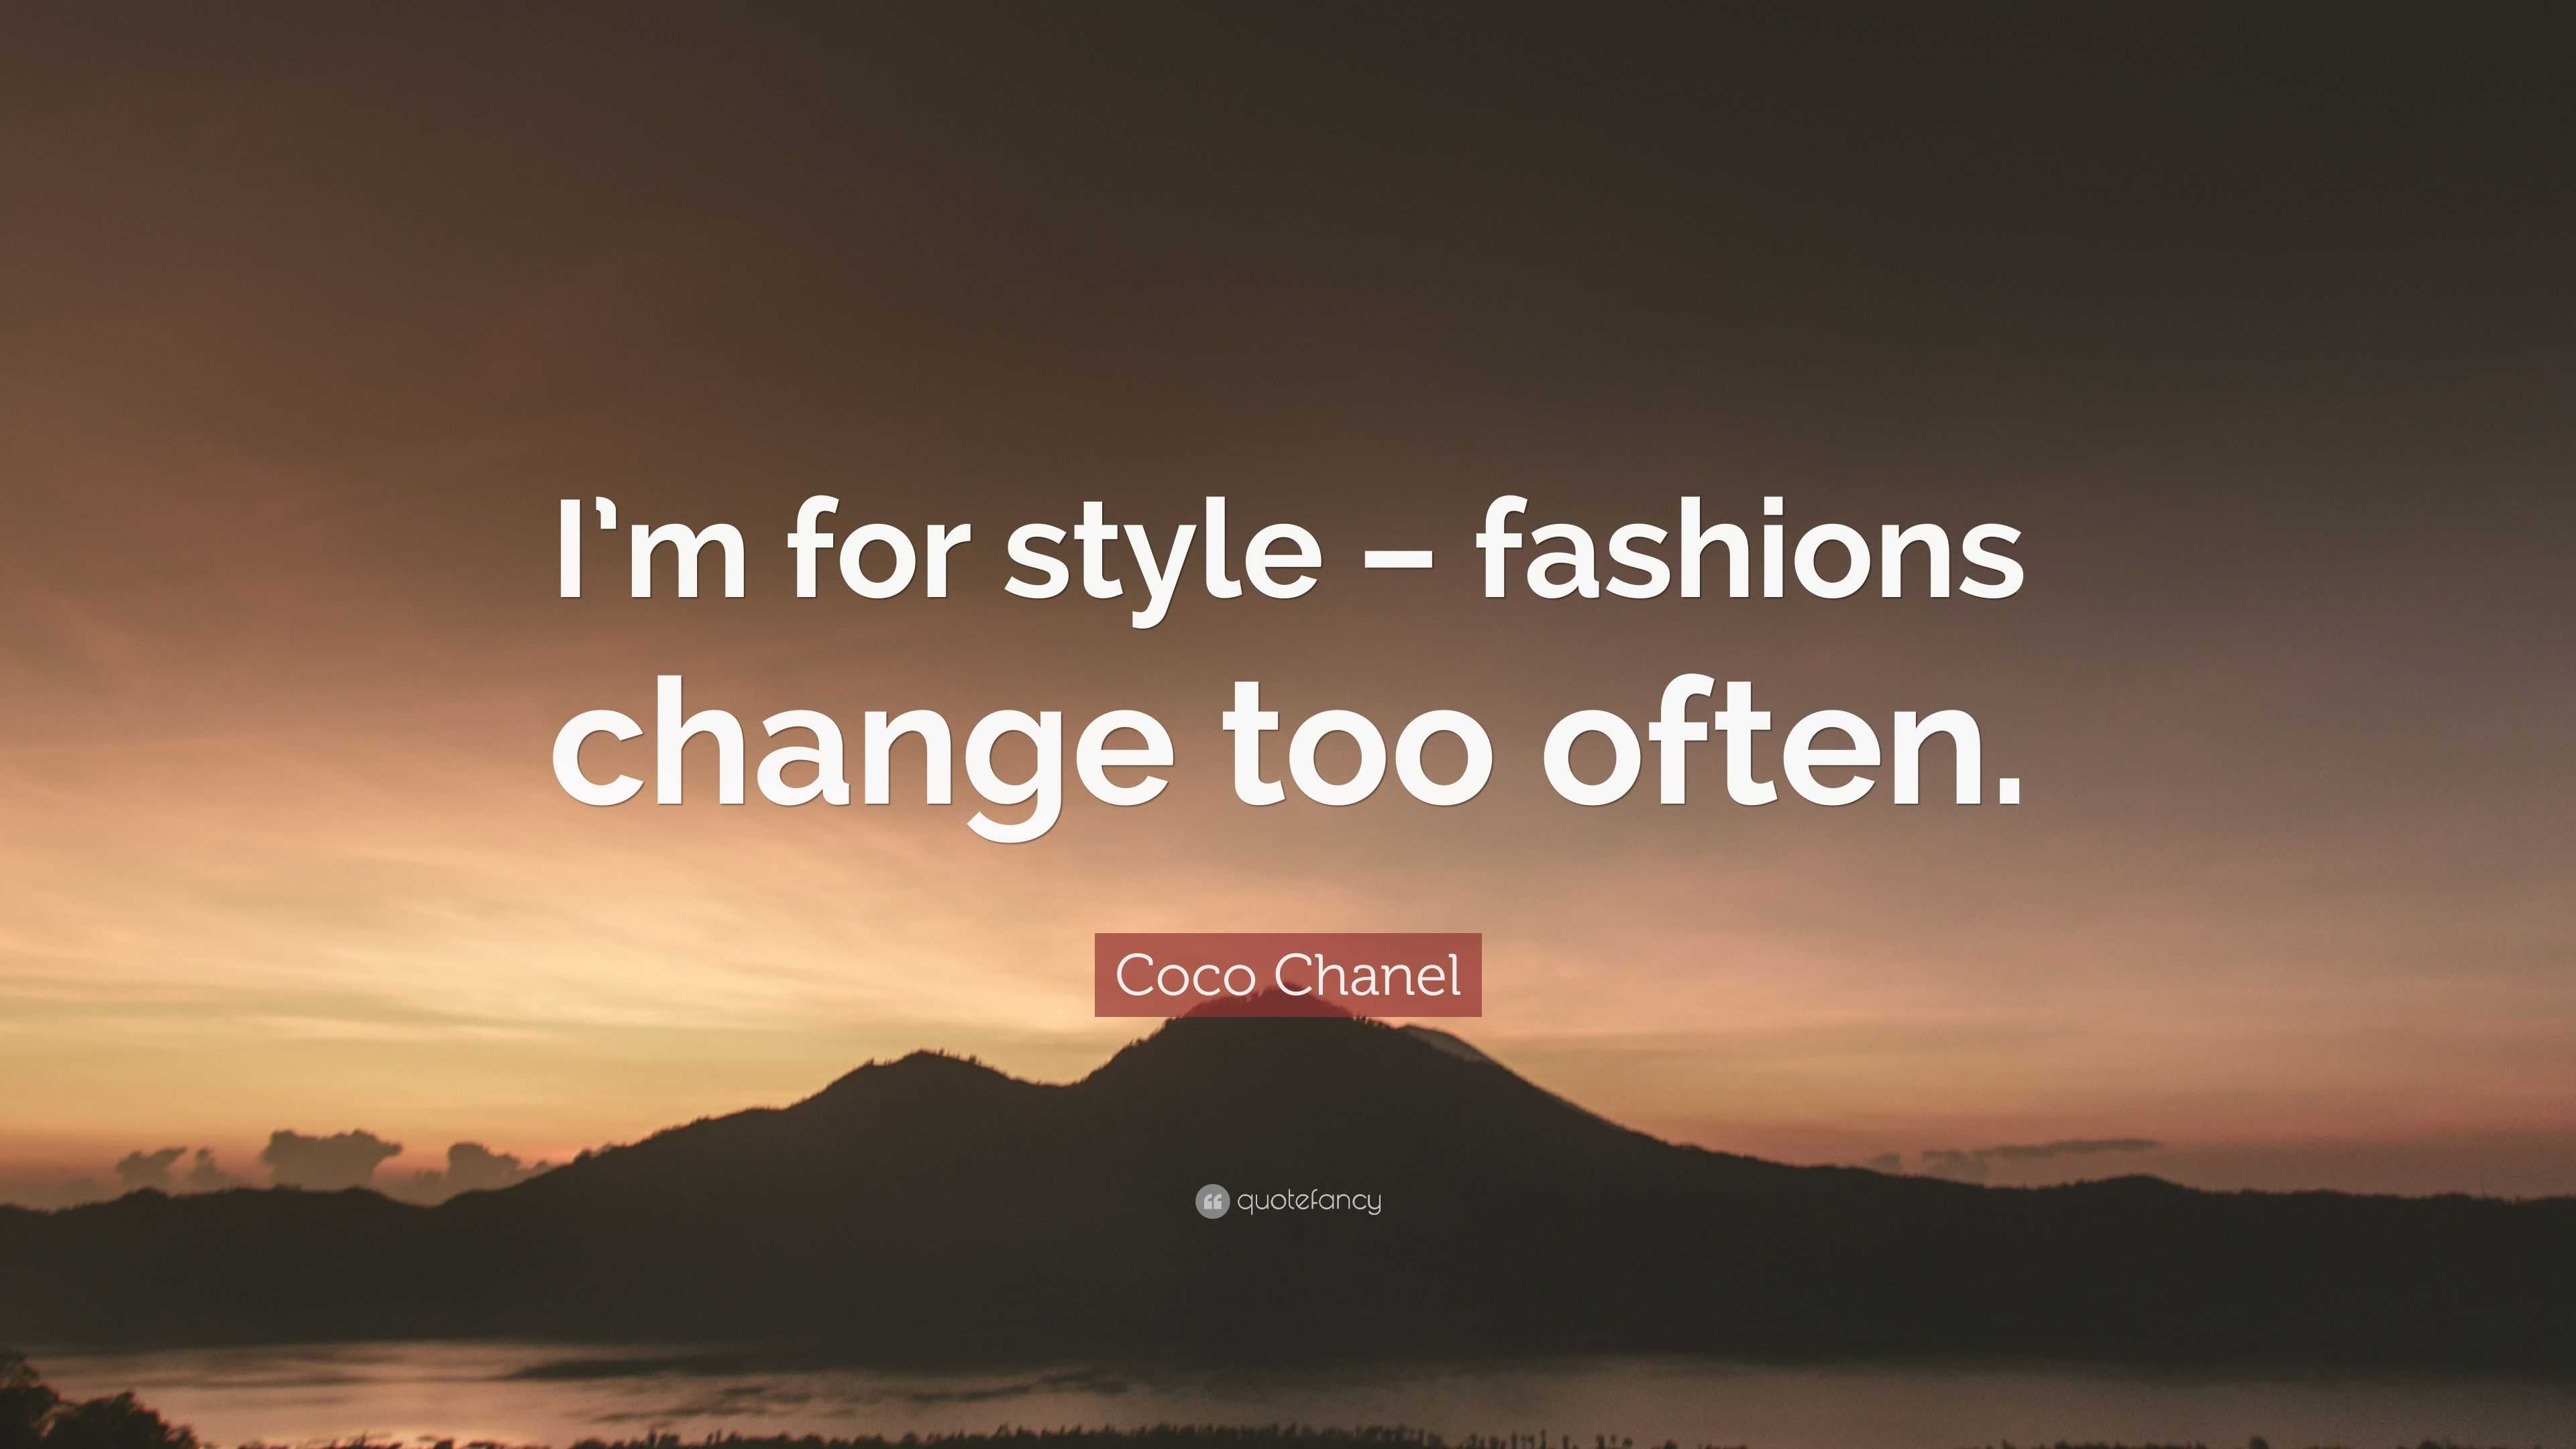 Top 200 Coco Chanel Quotes (2023 Update) - QuoteFancy